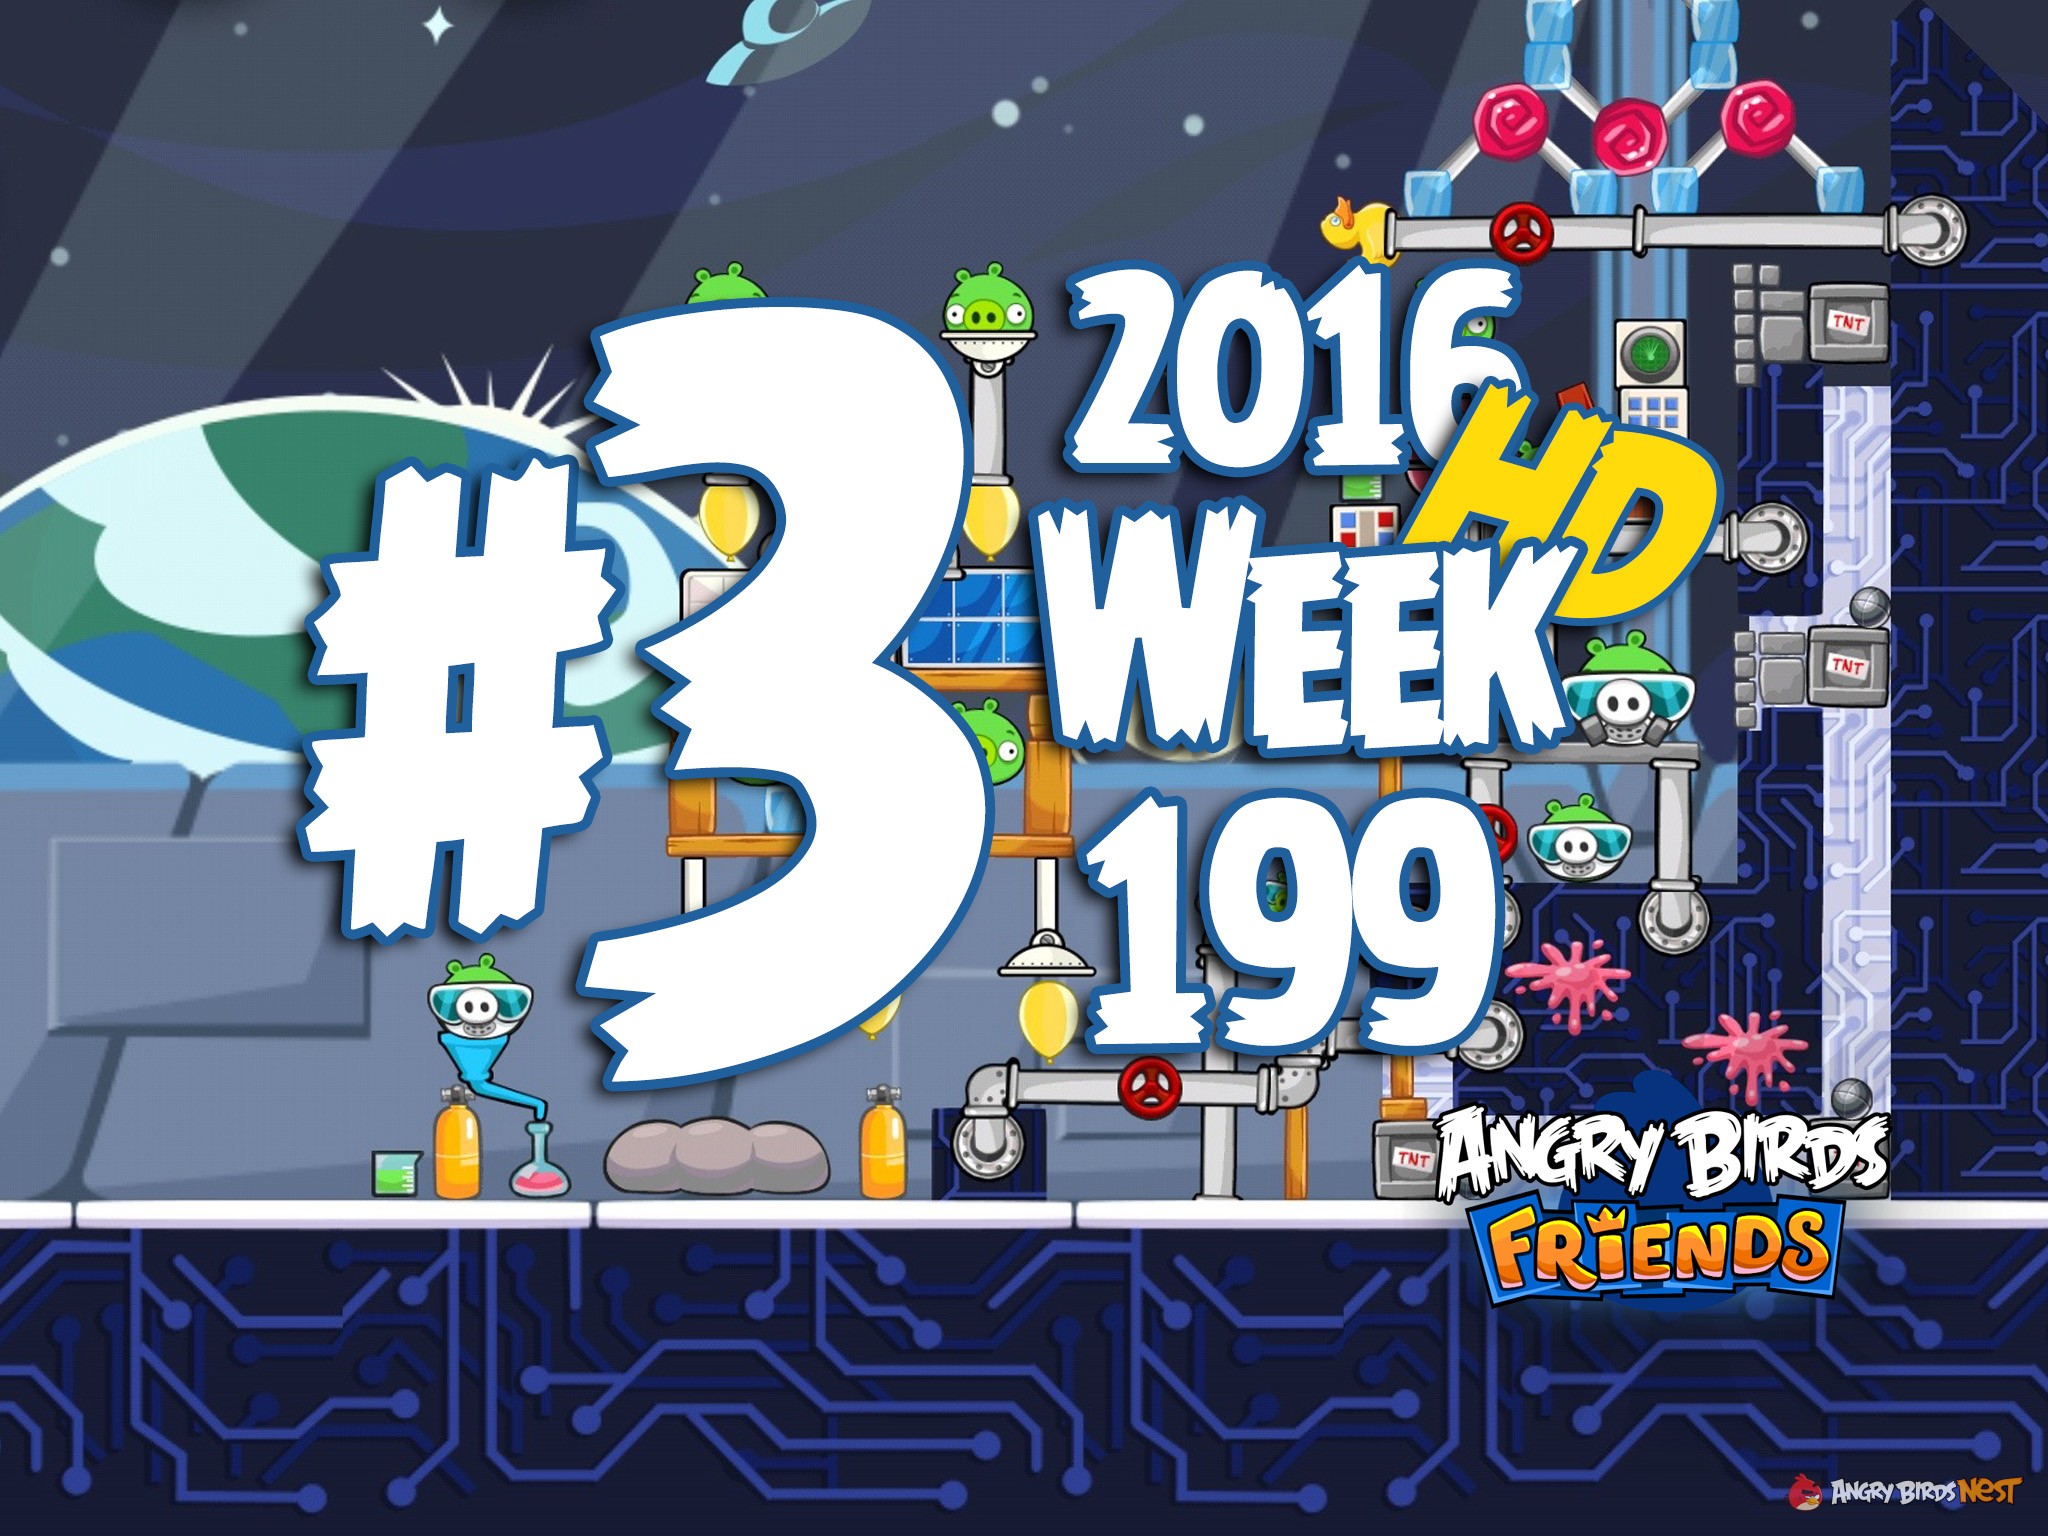 Angry Birds Friends Week 199 Level 3